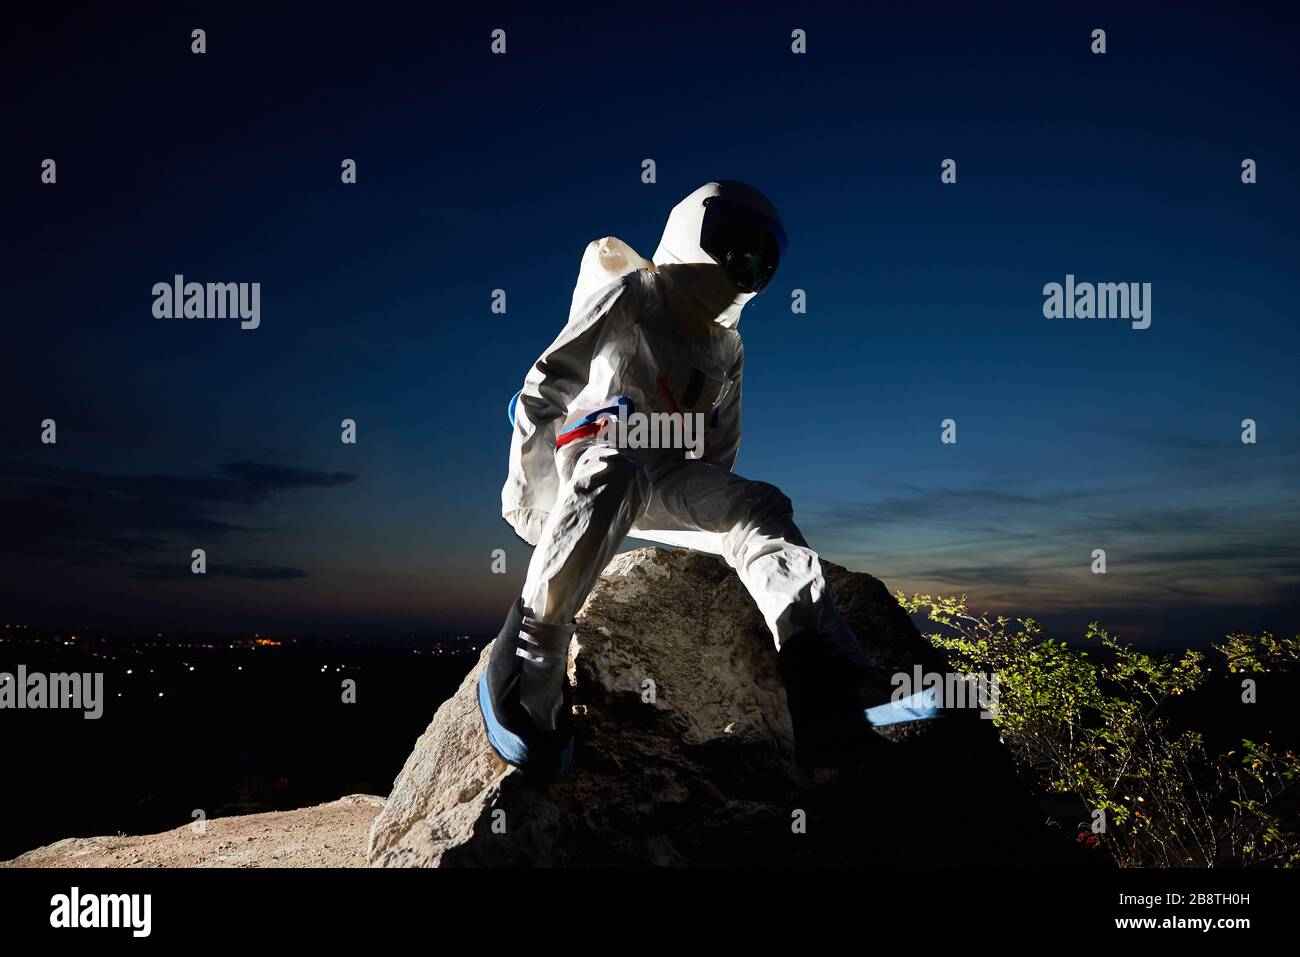 Premium Photo  A spaceman sits on a rock with a planet in the background.